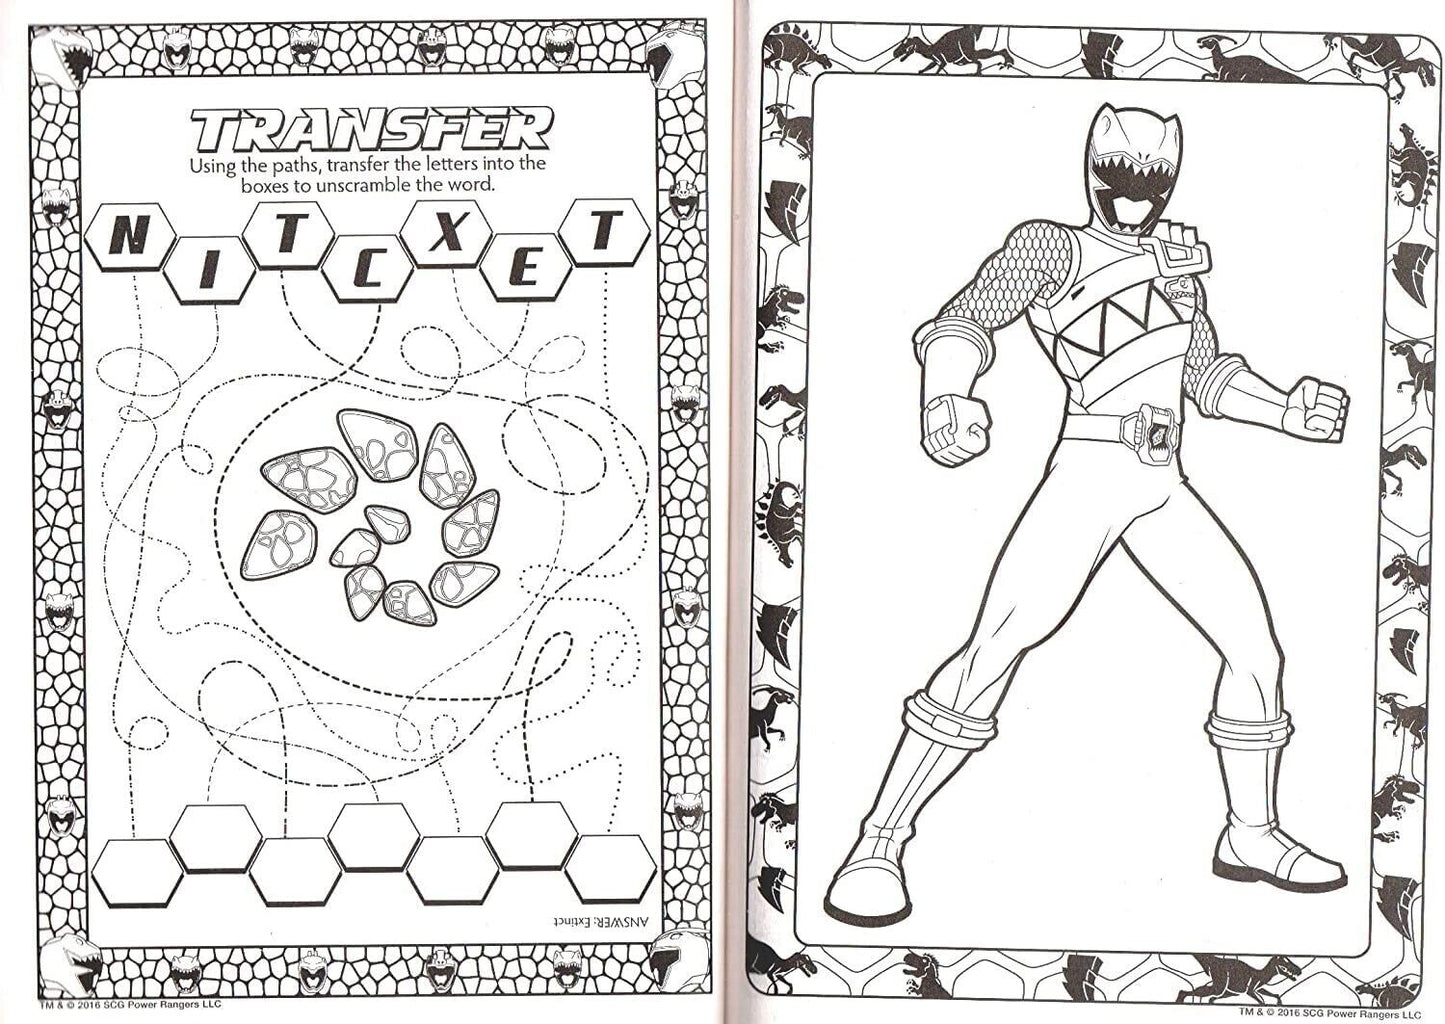 Power Rangers Dino Charge Jumbo Coloring & Activity Book - v2